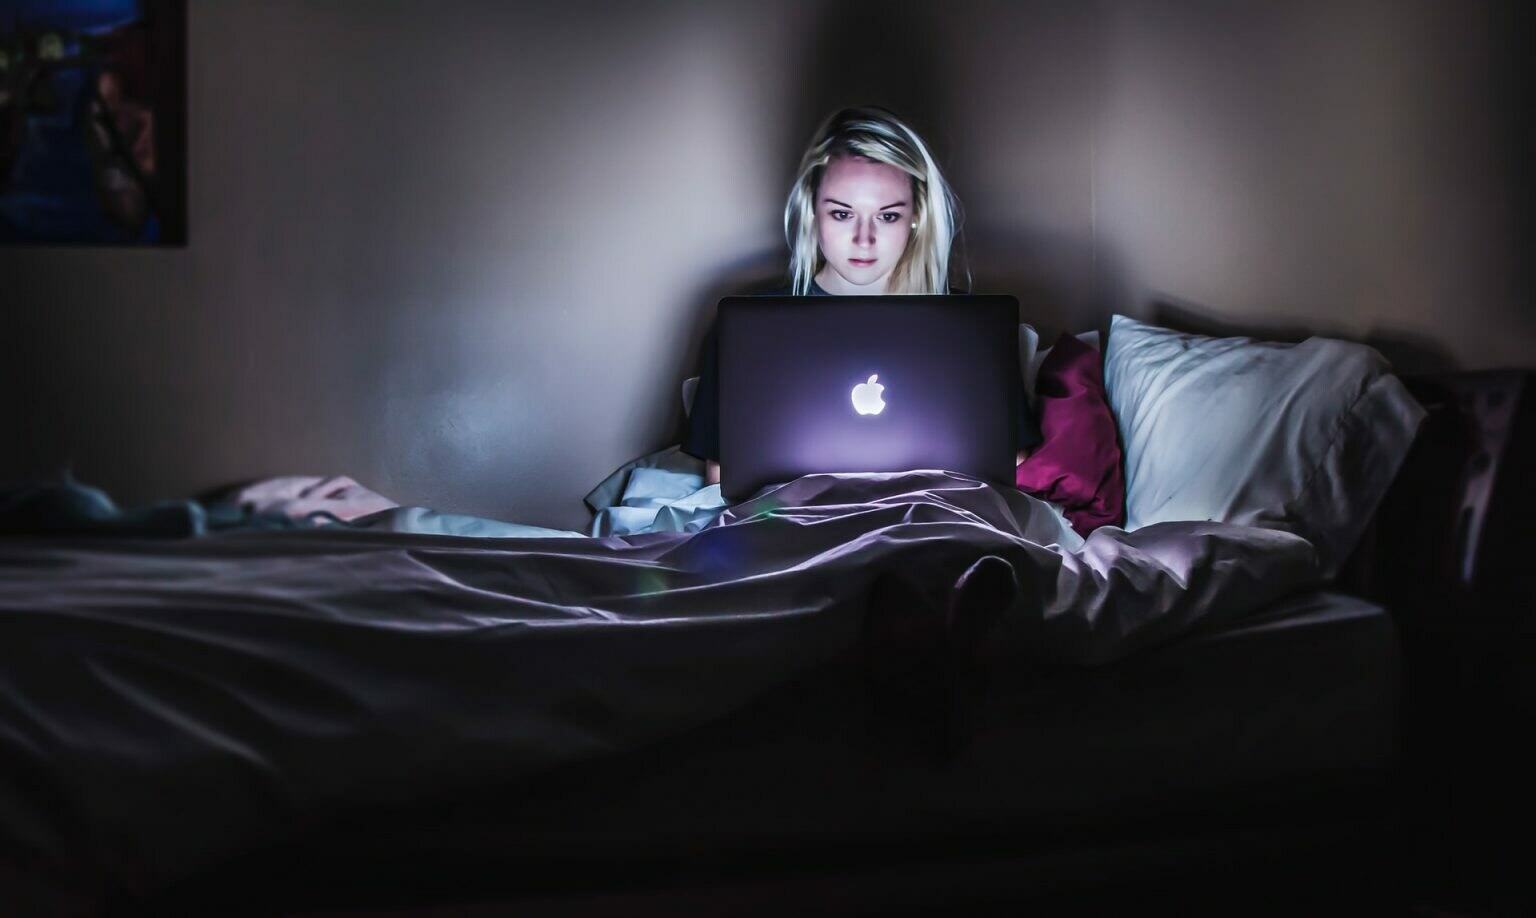 a person sitting on a bed with a laptop on the lap